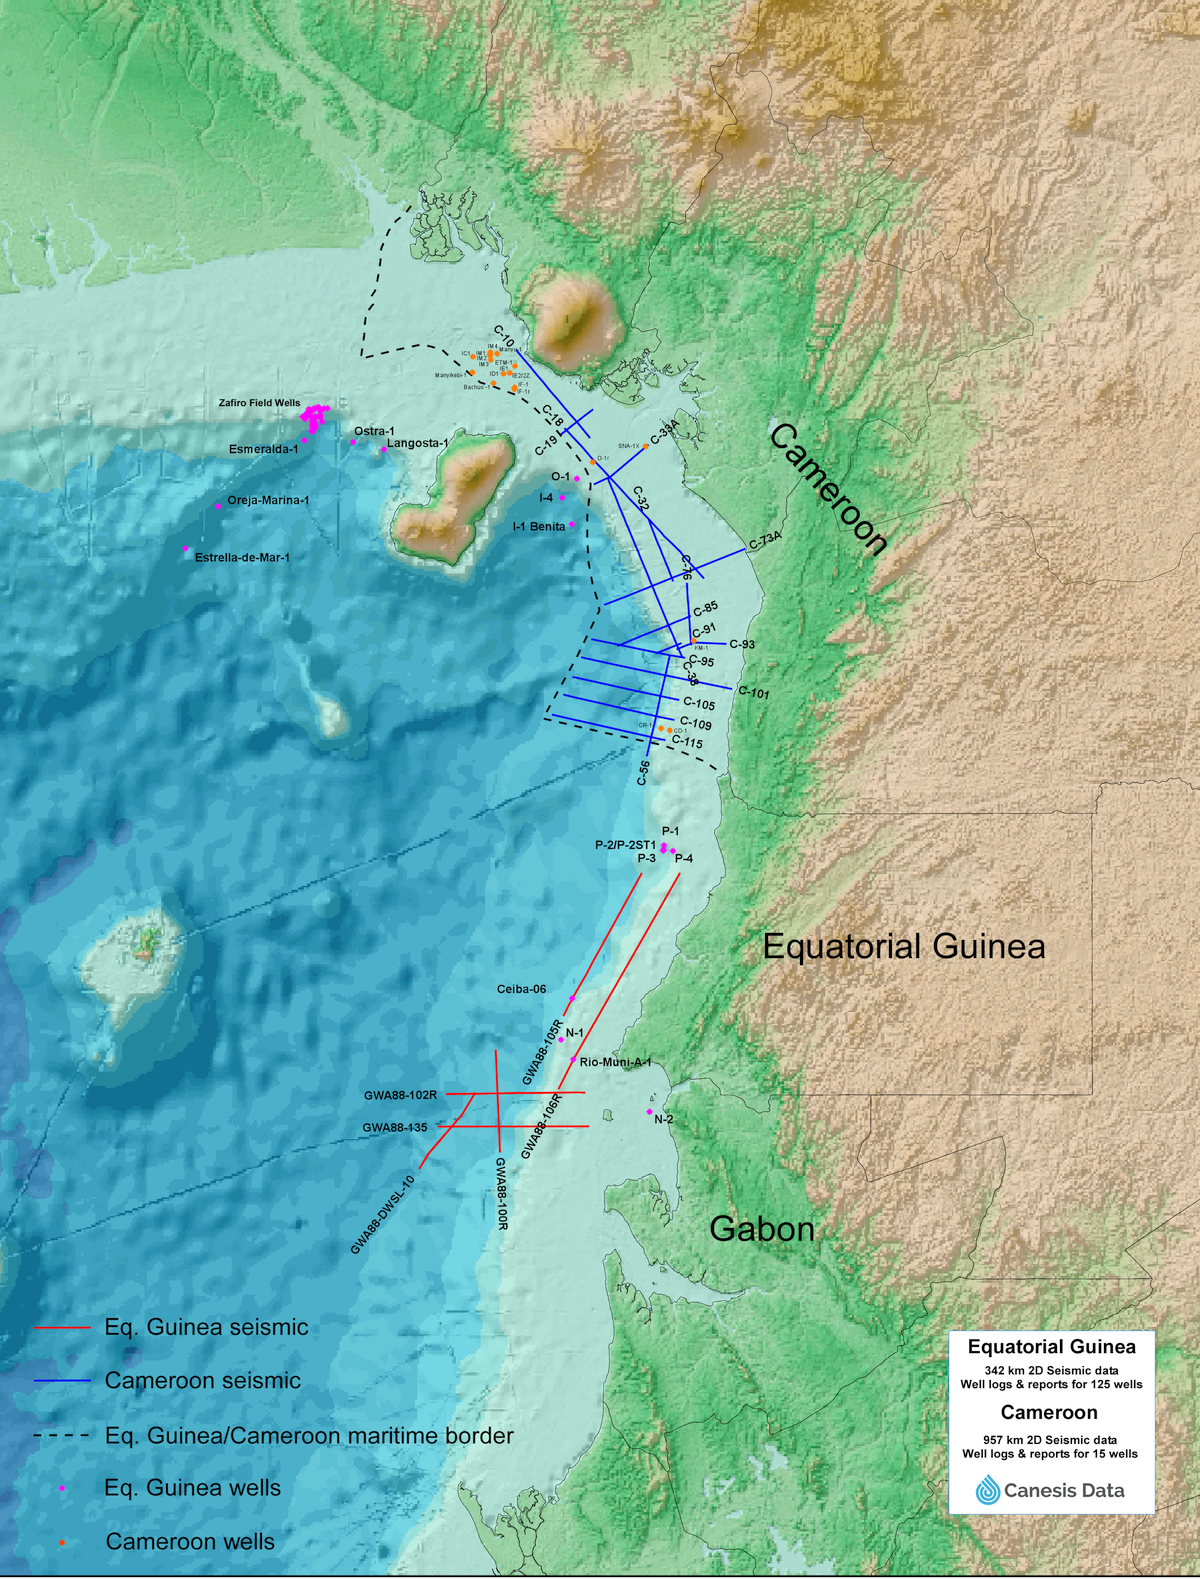 Cameroon & Equatorial Guinea seismic and well data location map.